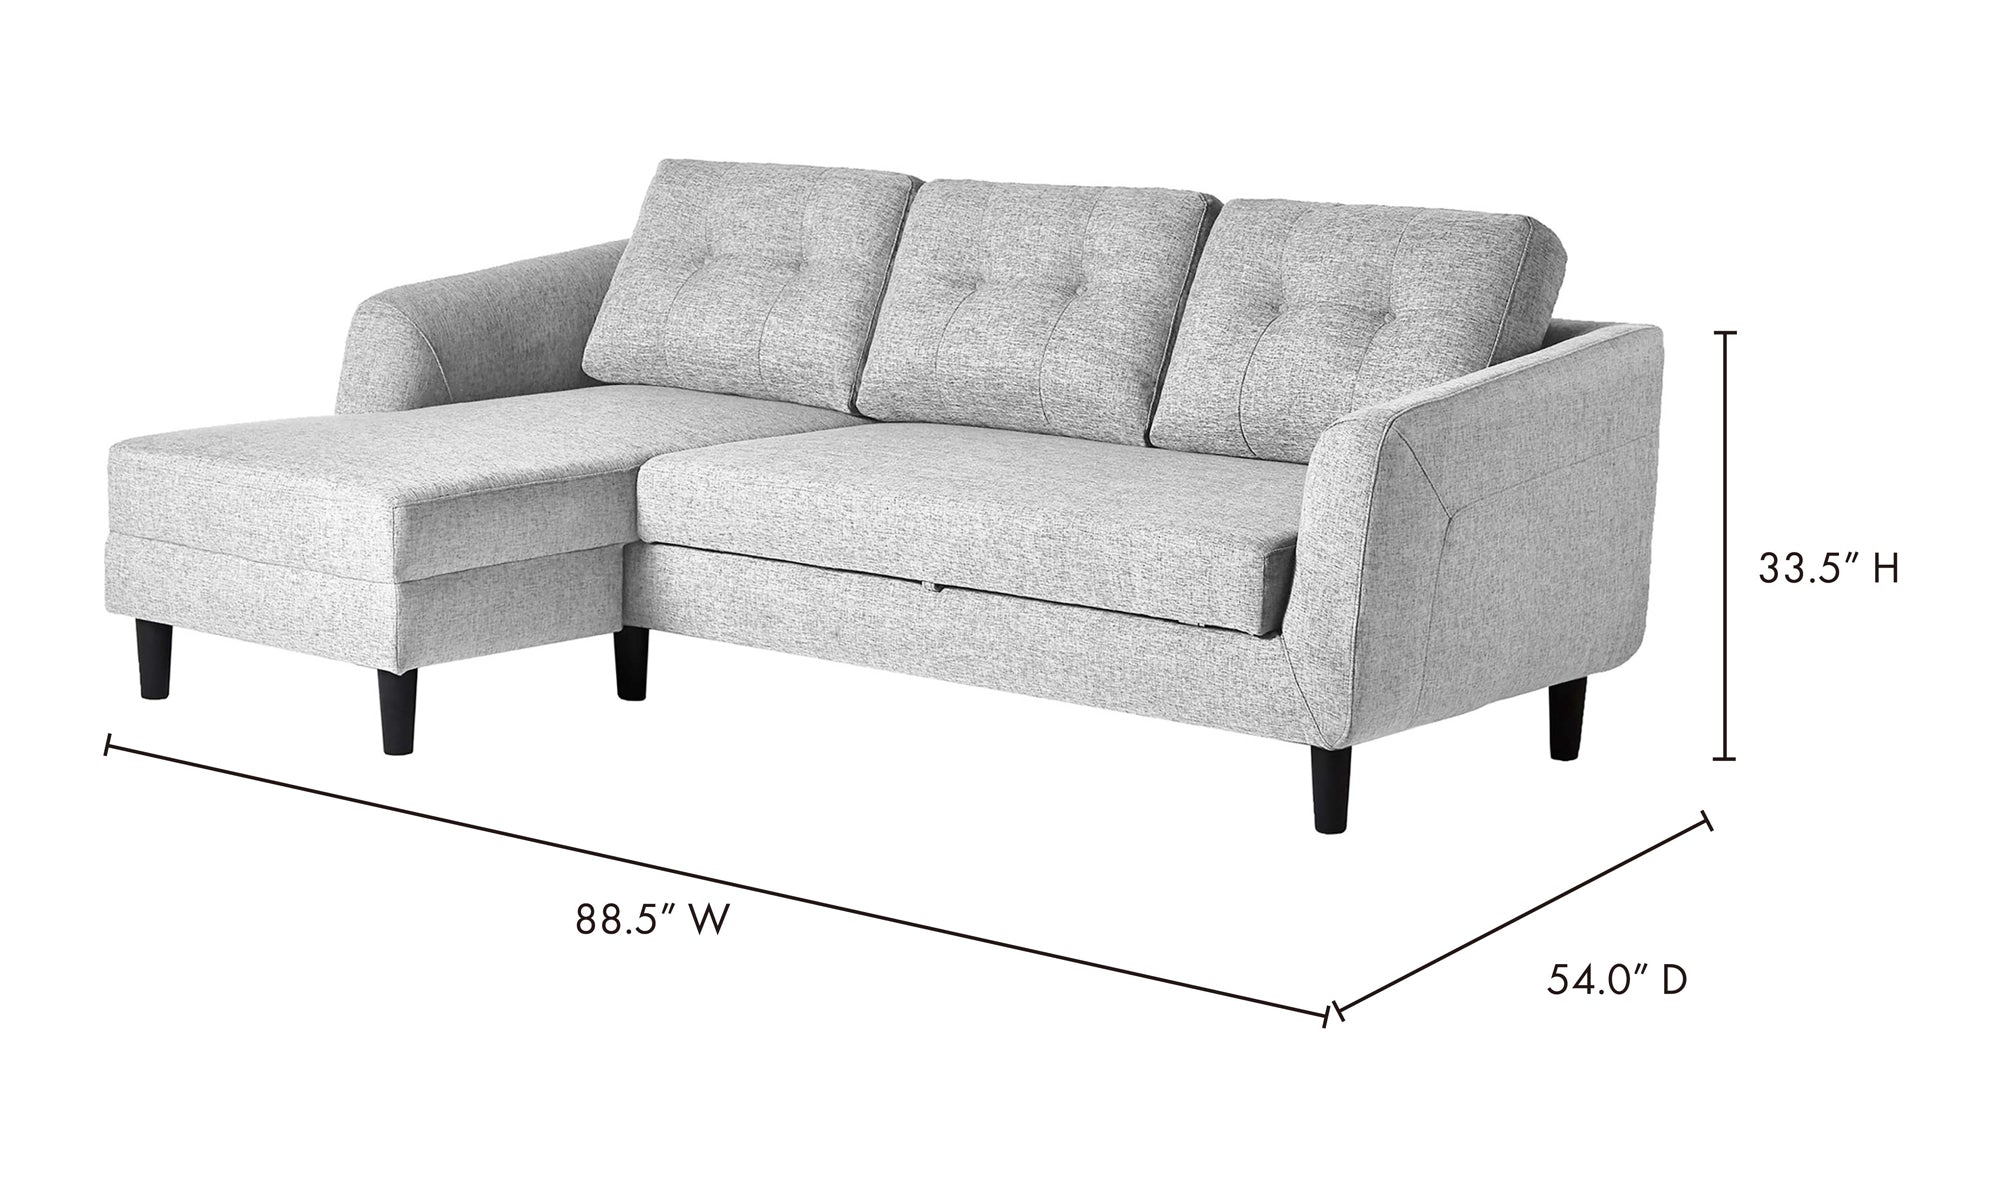 Belagio Left Facing Sofa Bed With Chaise - Light Grey